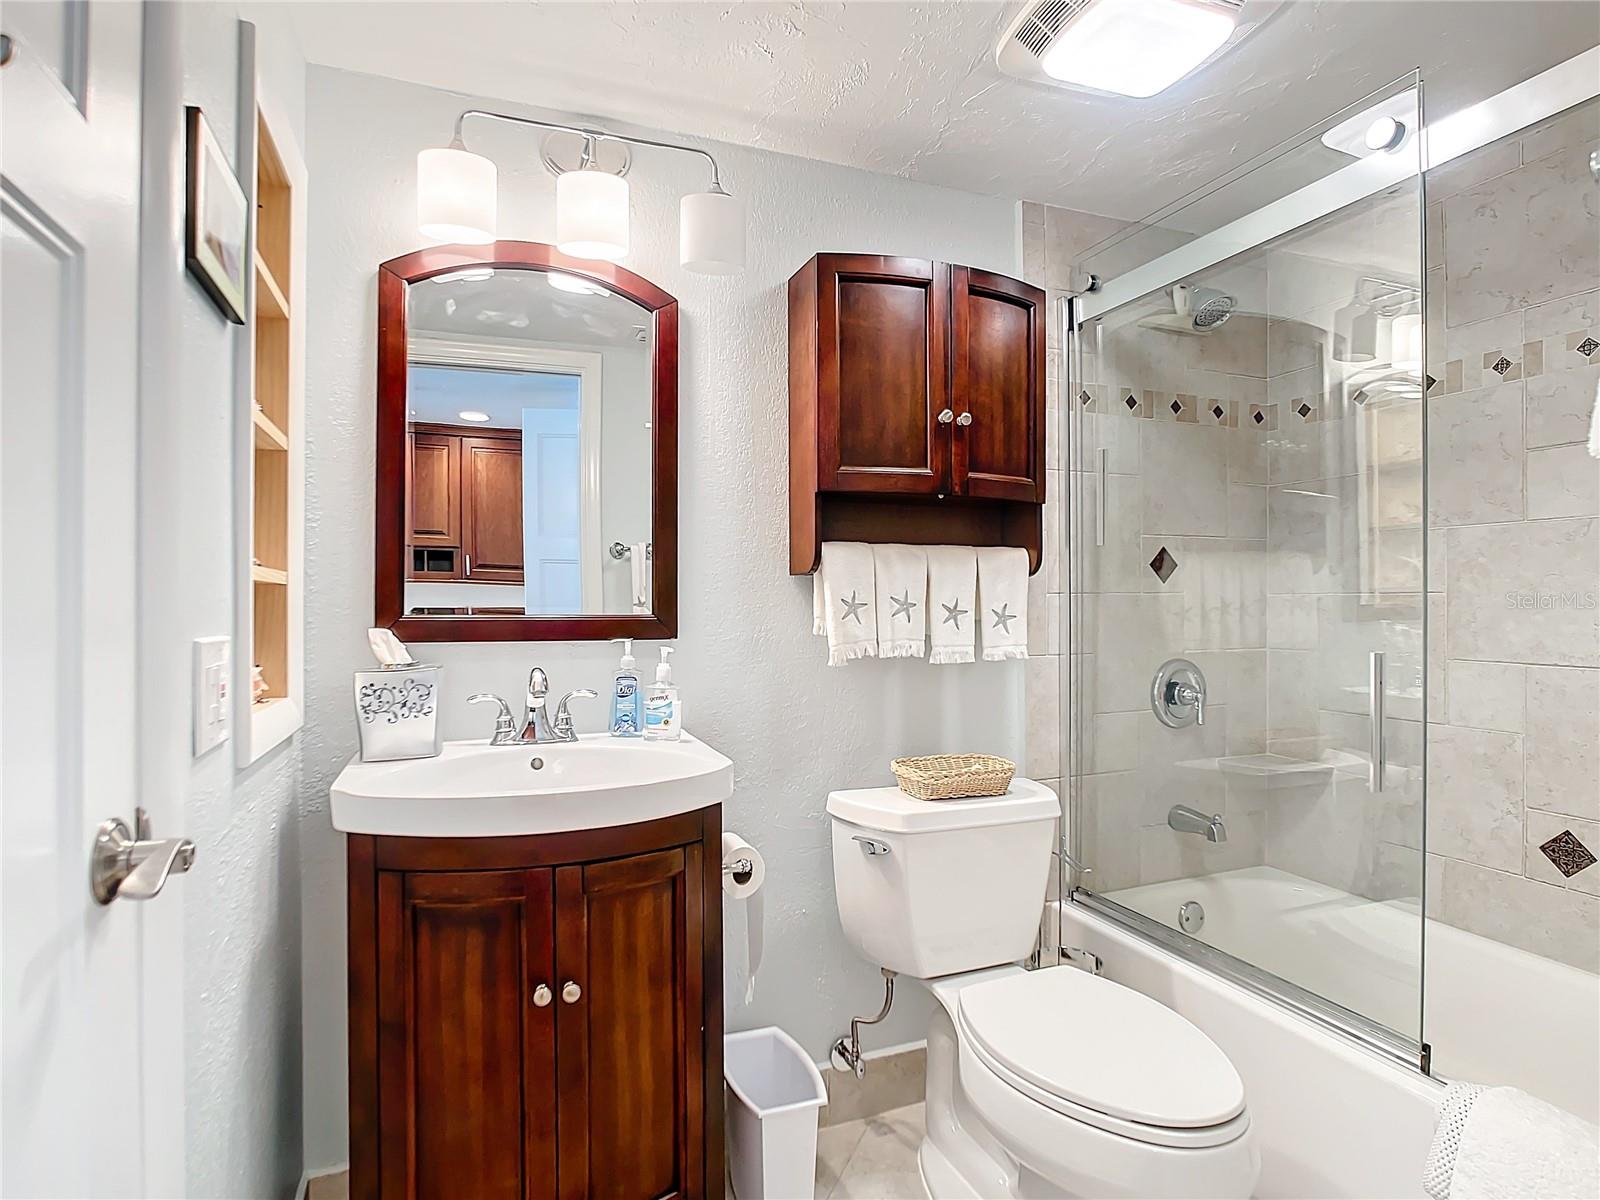 Hall bathroom has separate entrance from 2nd bathroom - making it an ensuite if you want to.